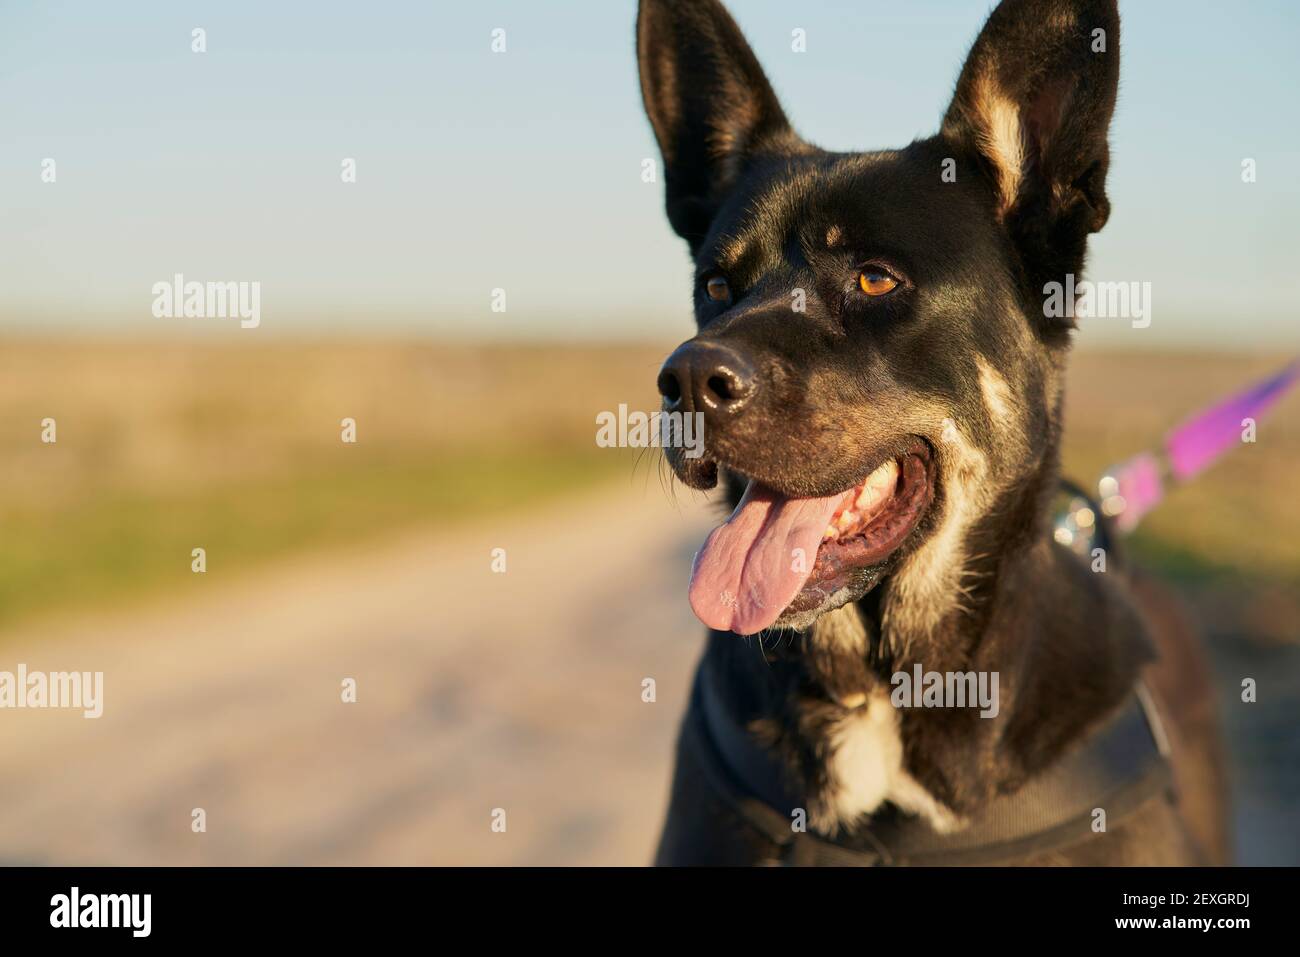 Close-up of black dog with brown and white spots on alert Stock Photo